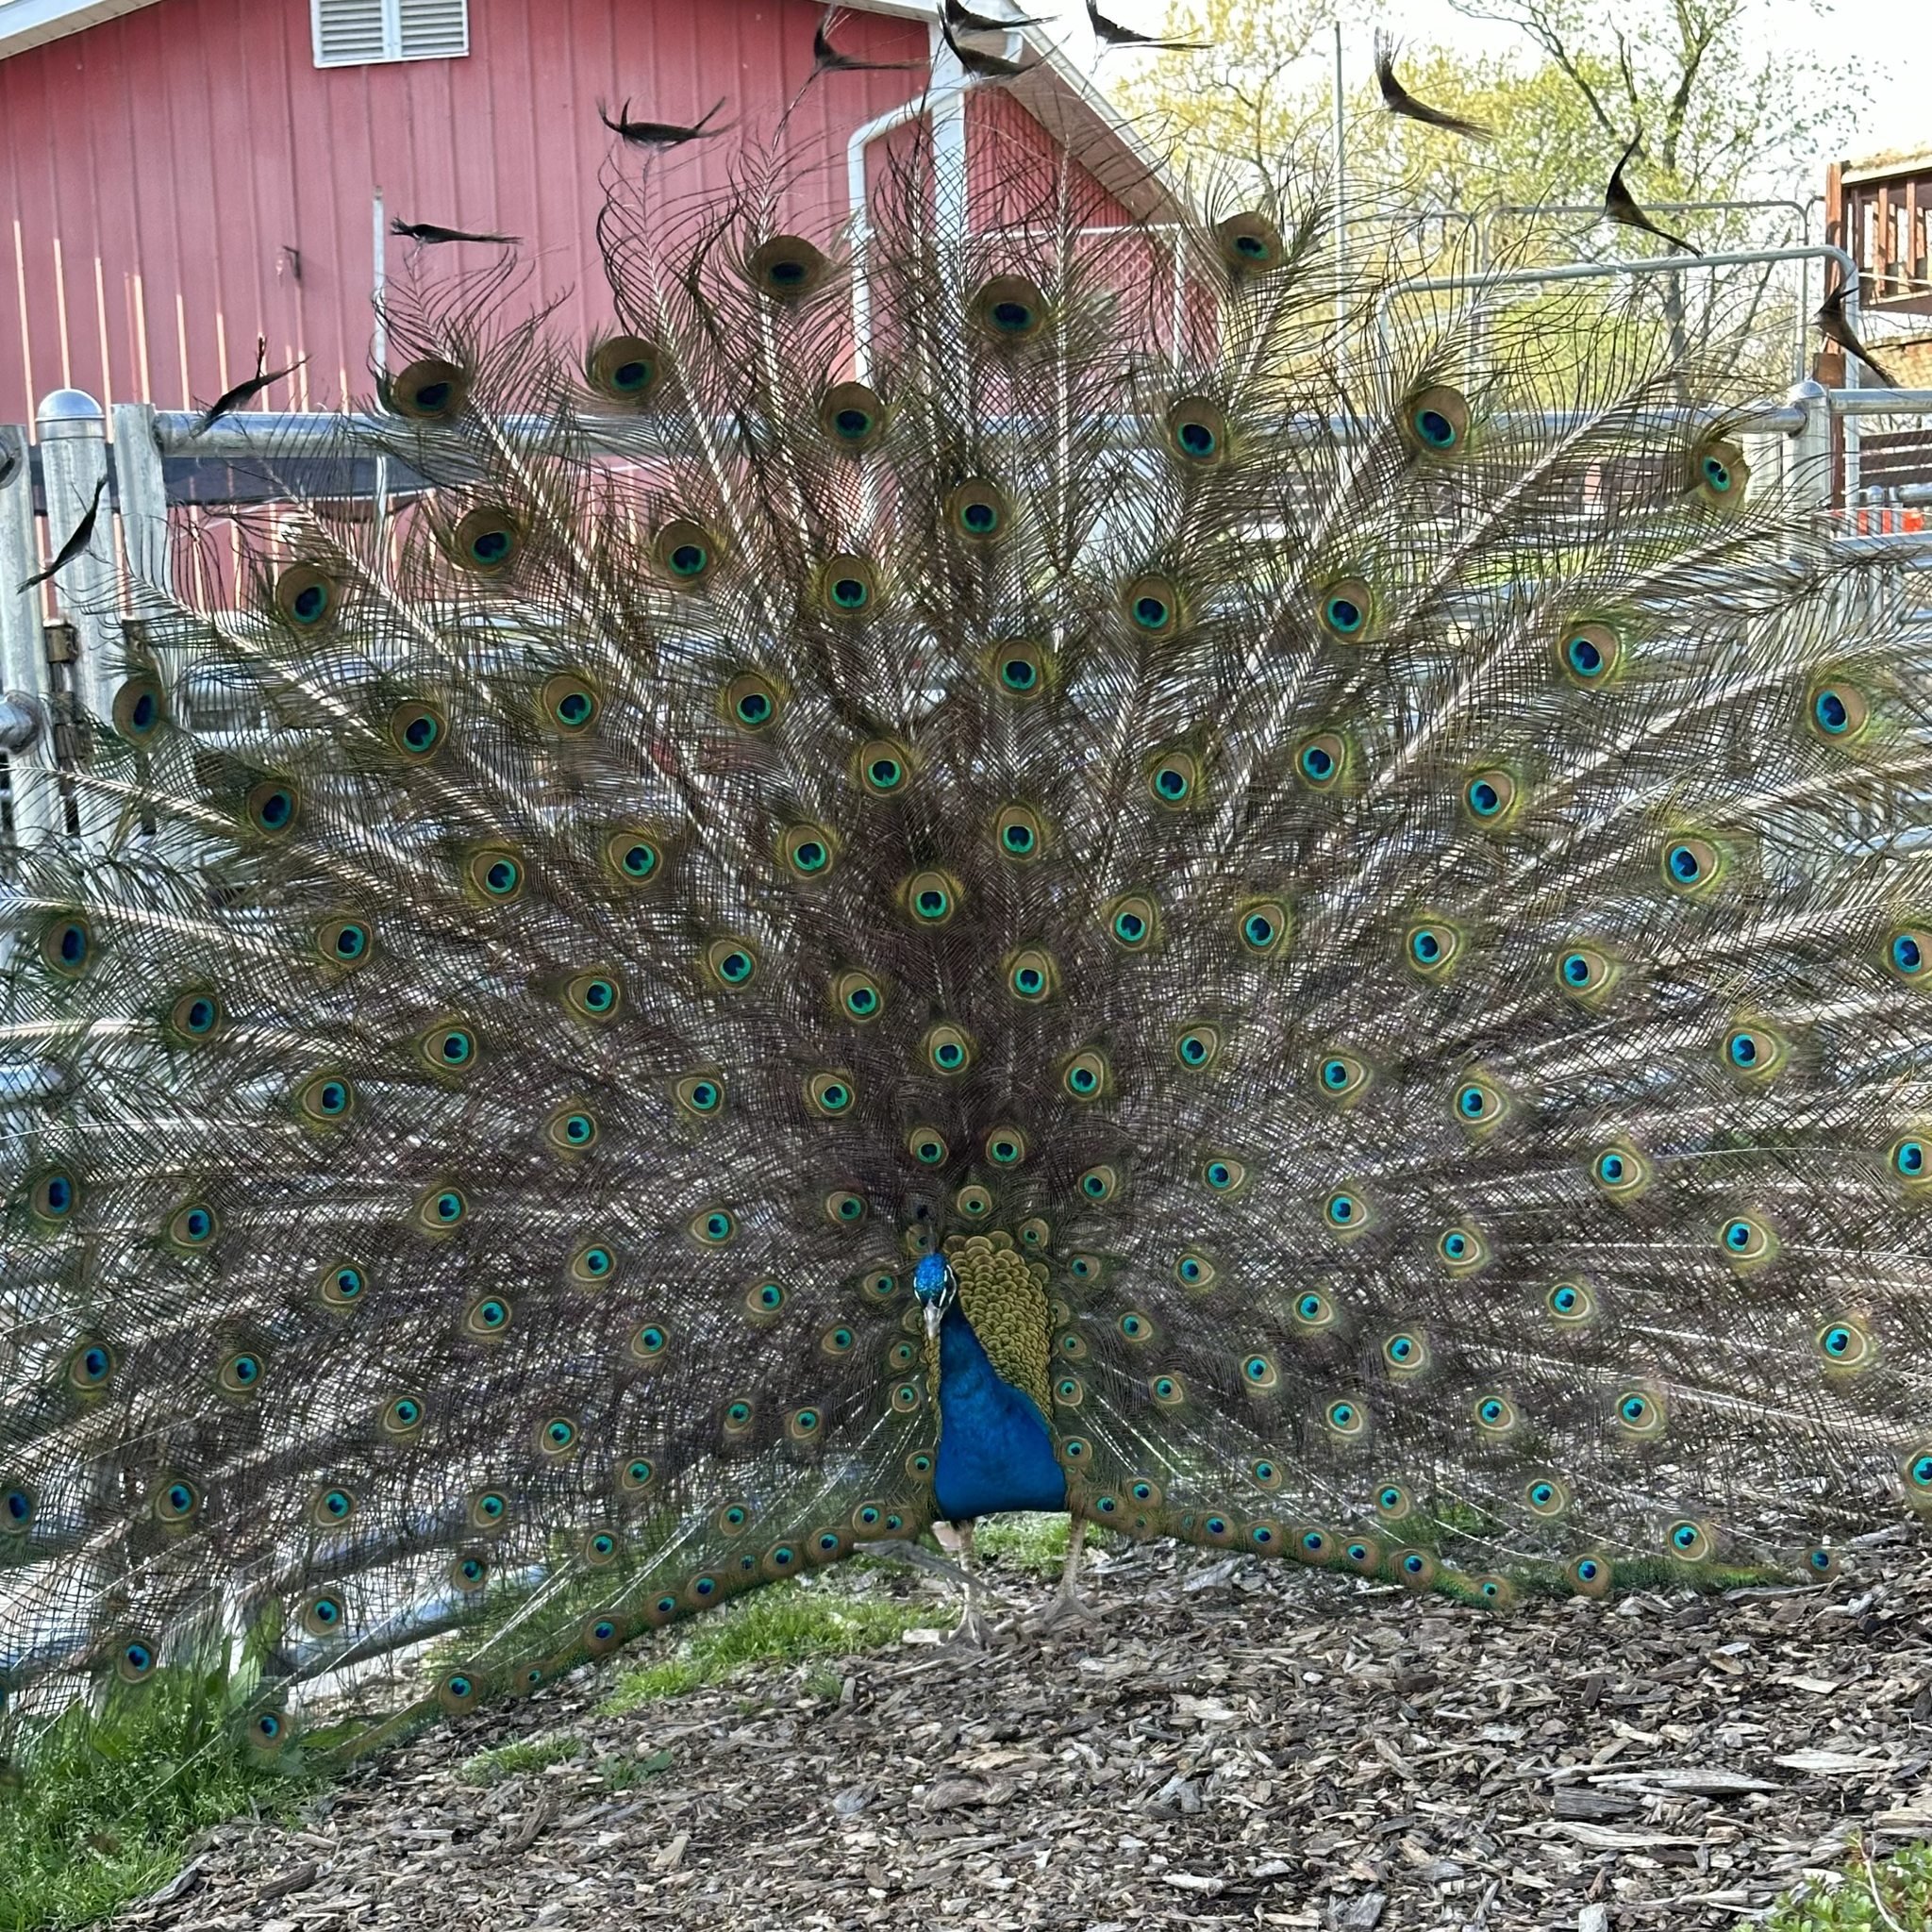 Look whose showing off! 
Proud to be a Bowers peacock
Come check him out, and our other animals until 8pm tonight. 
Last wagon ride at 7:30pm 
Campfire is going, a little music is playing, kitchen is open, ice cream is here!